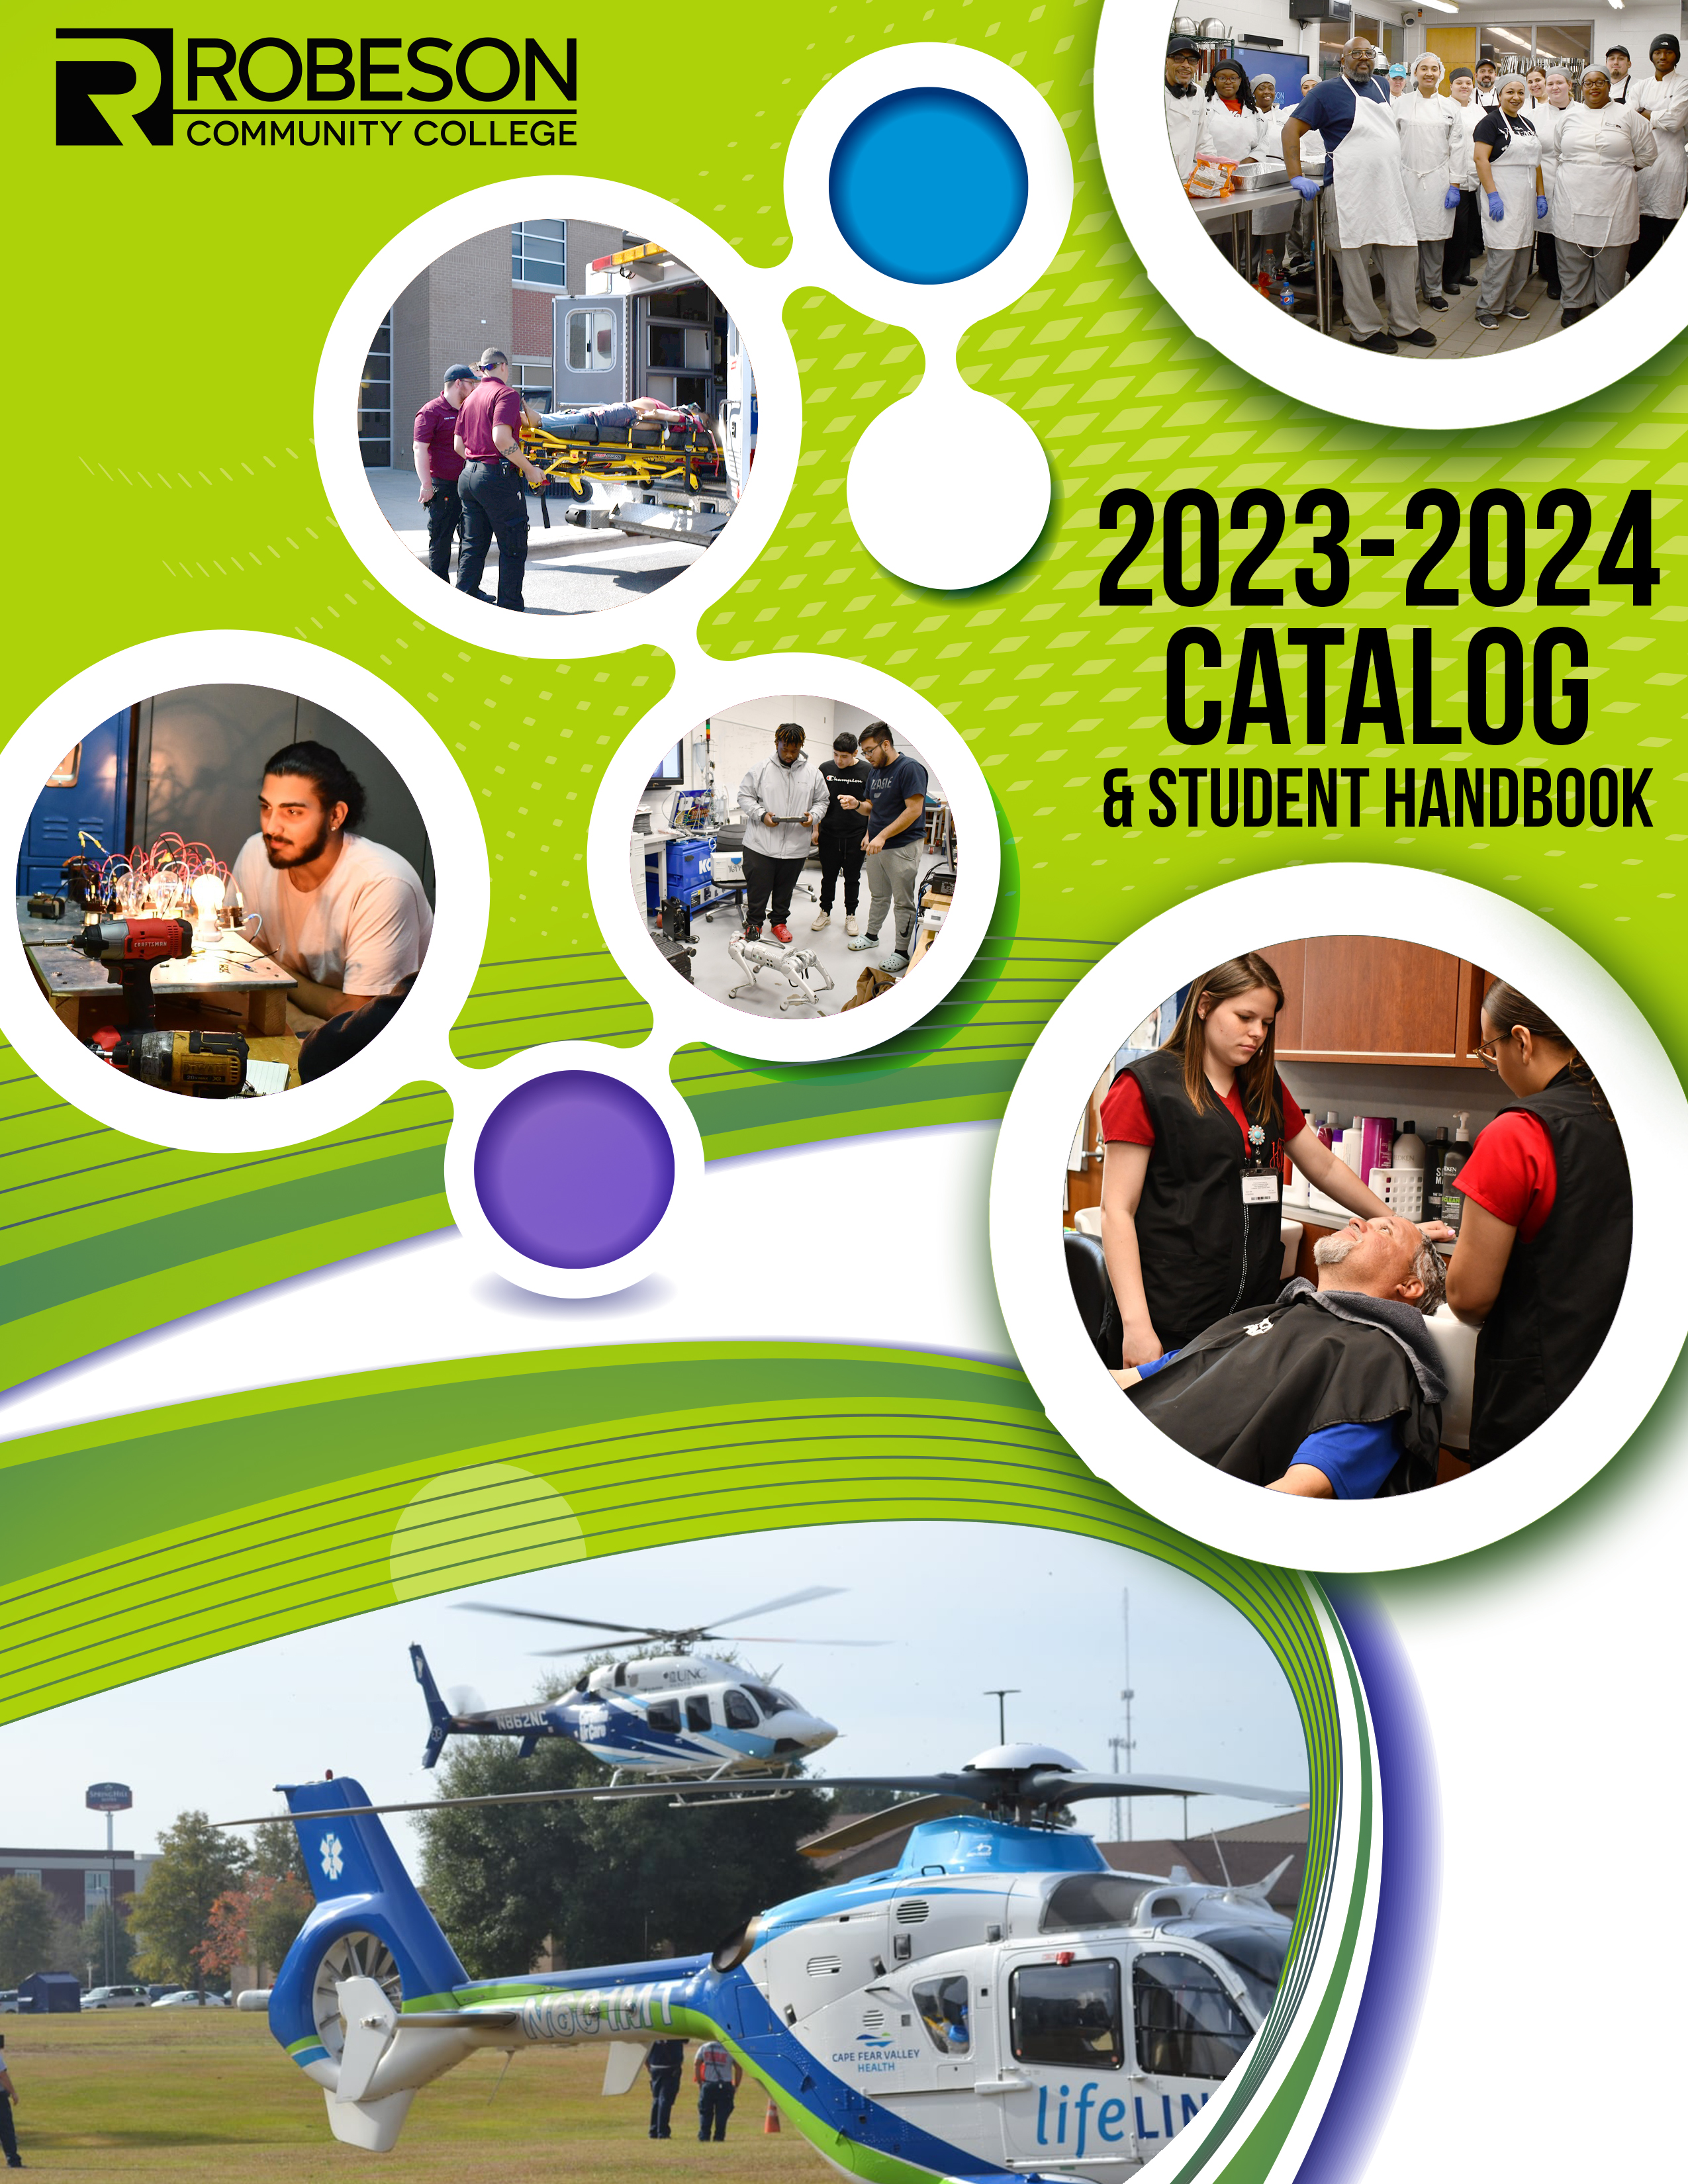 2023-2024 Catalog and Student Handbook; eight circular frames containing images of individual students, groups of students, colors, and helicopters.